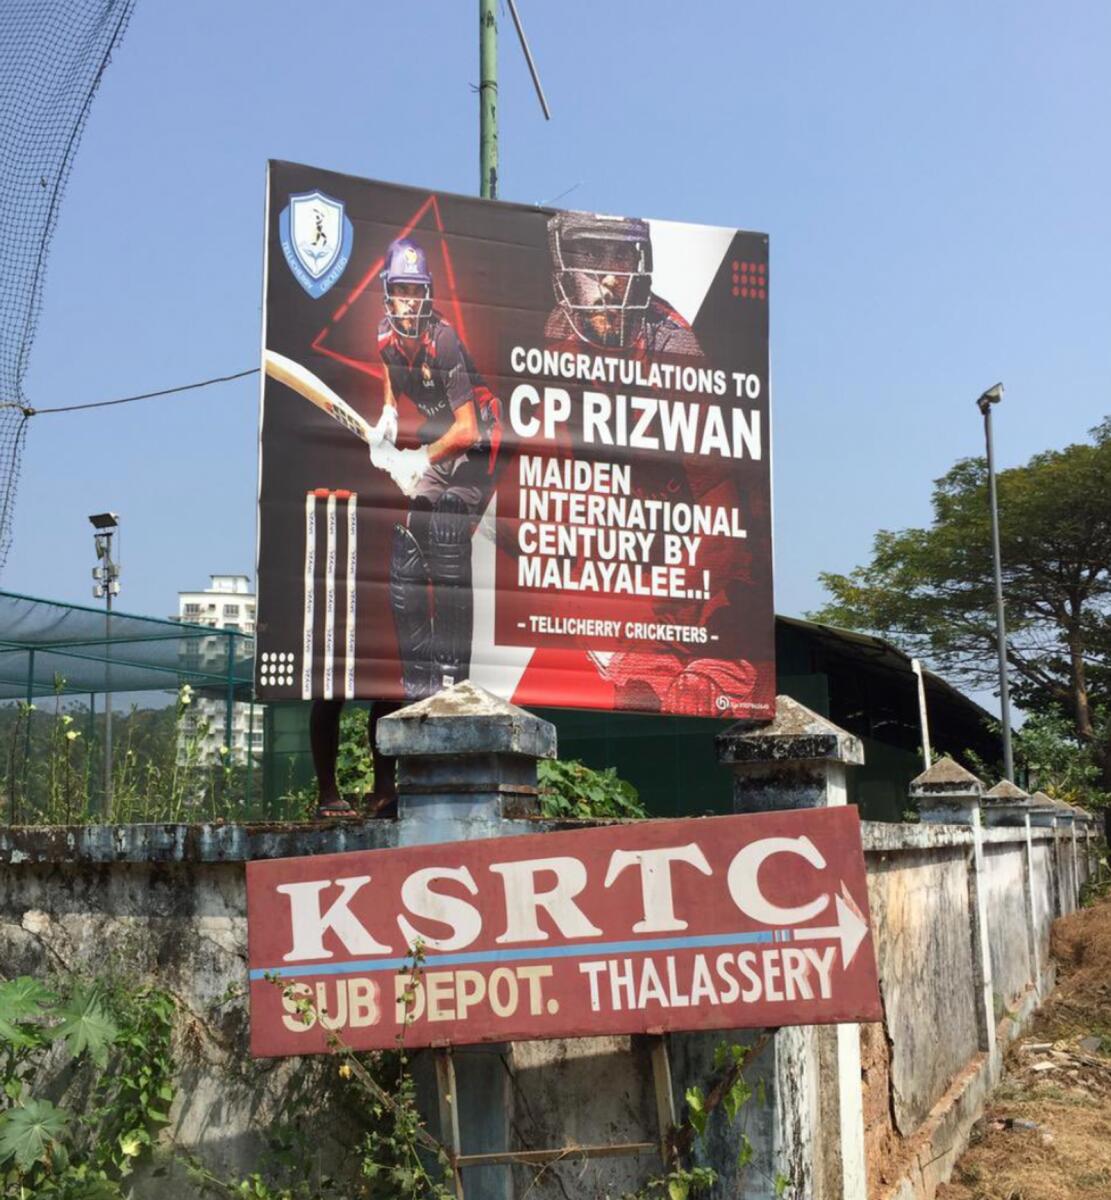 Rizwan became a cricket hero in Thalassery, his home town in Kerala, India, after his ODI hundred against Ireland in 2021